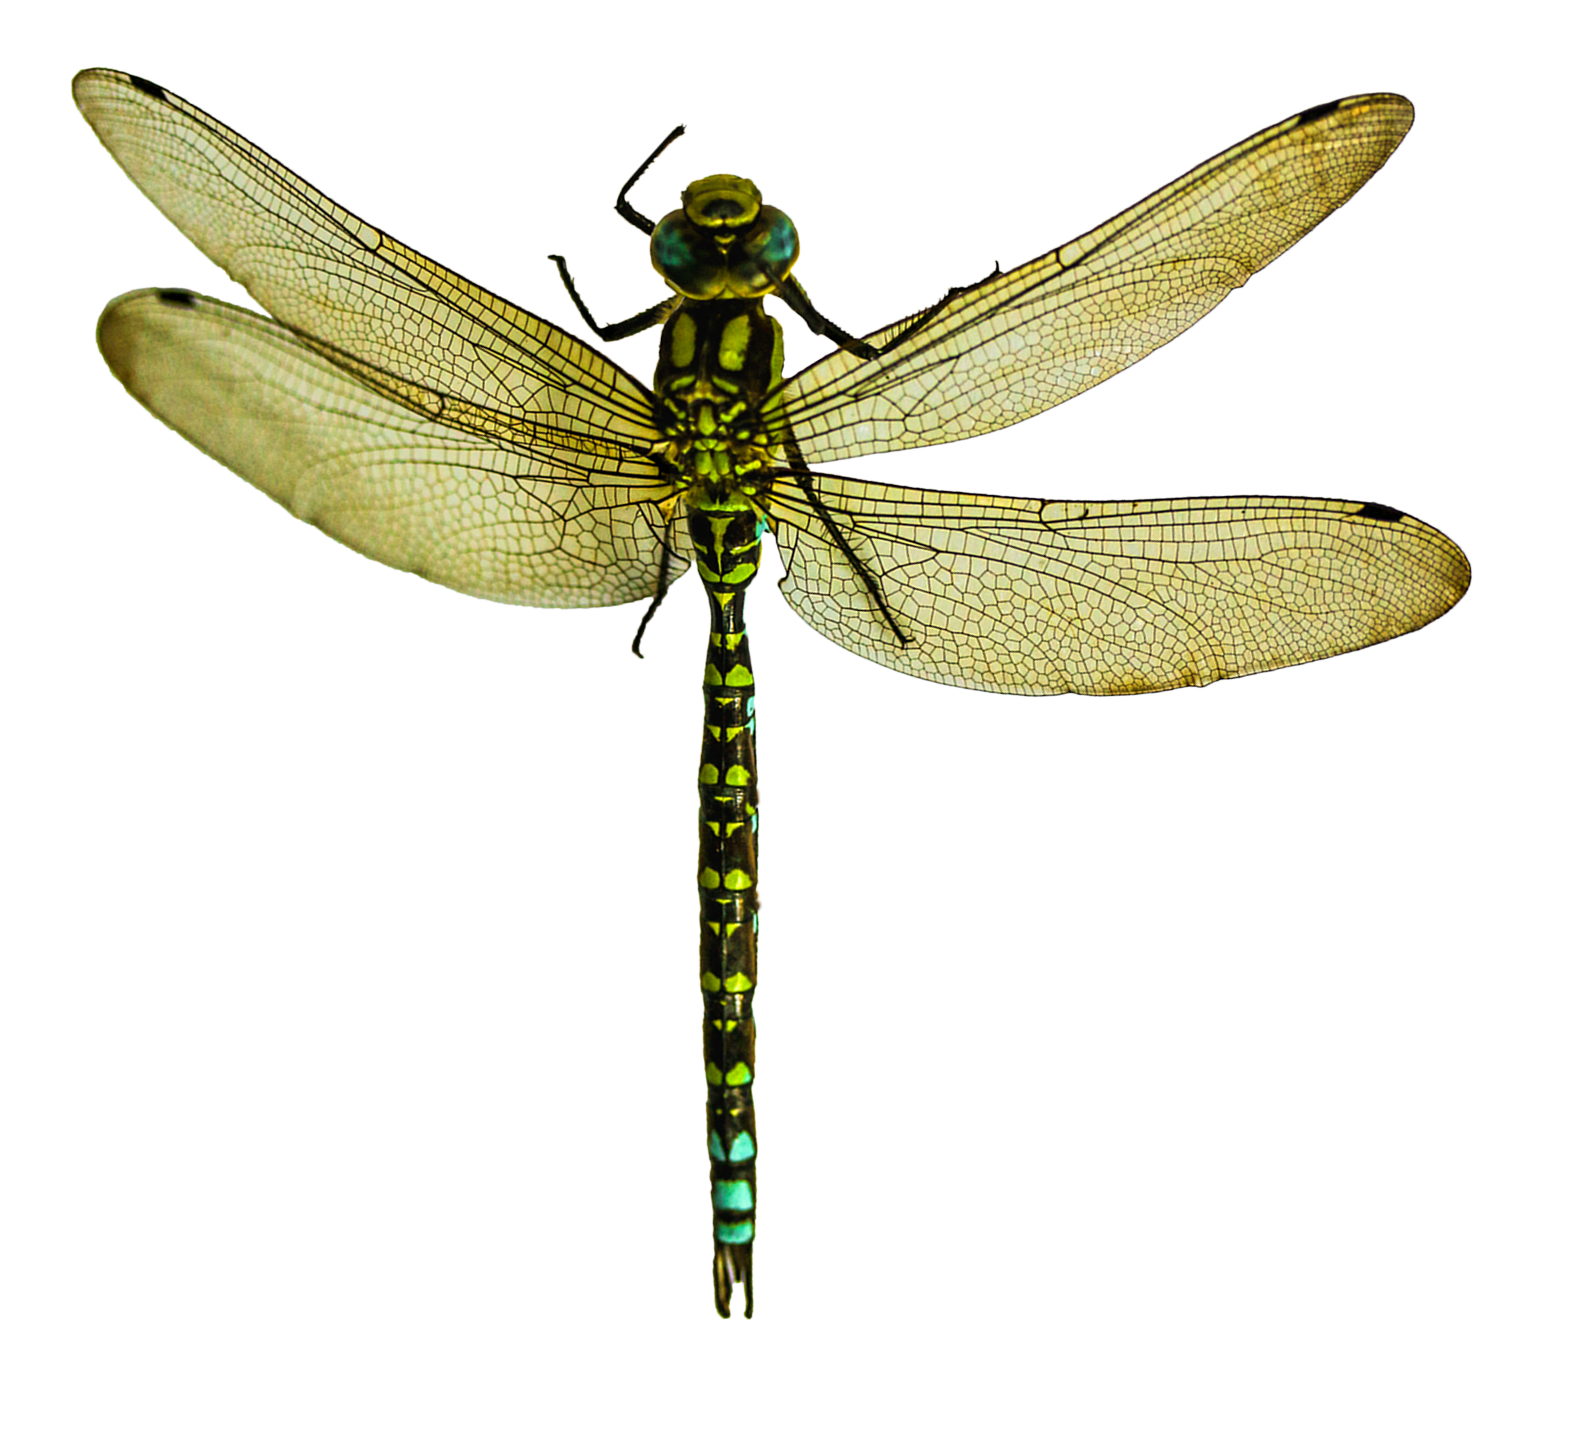 Dragonfly PNG image free Download 